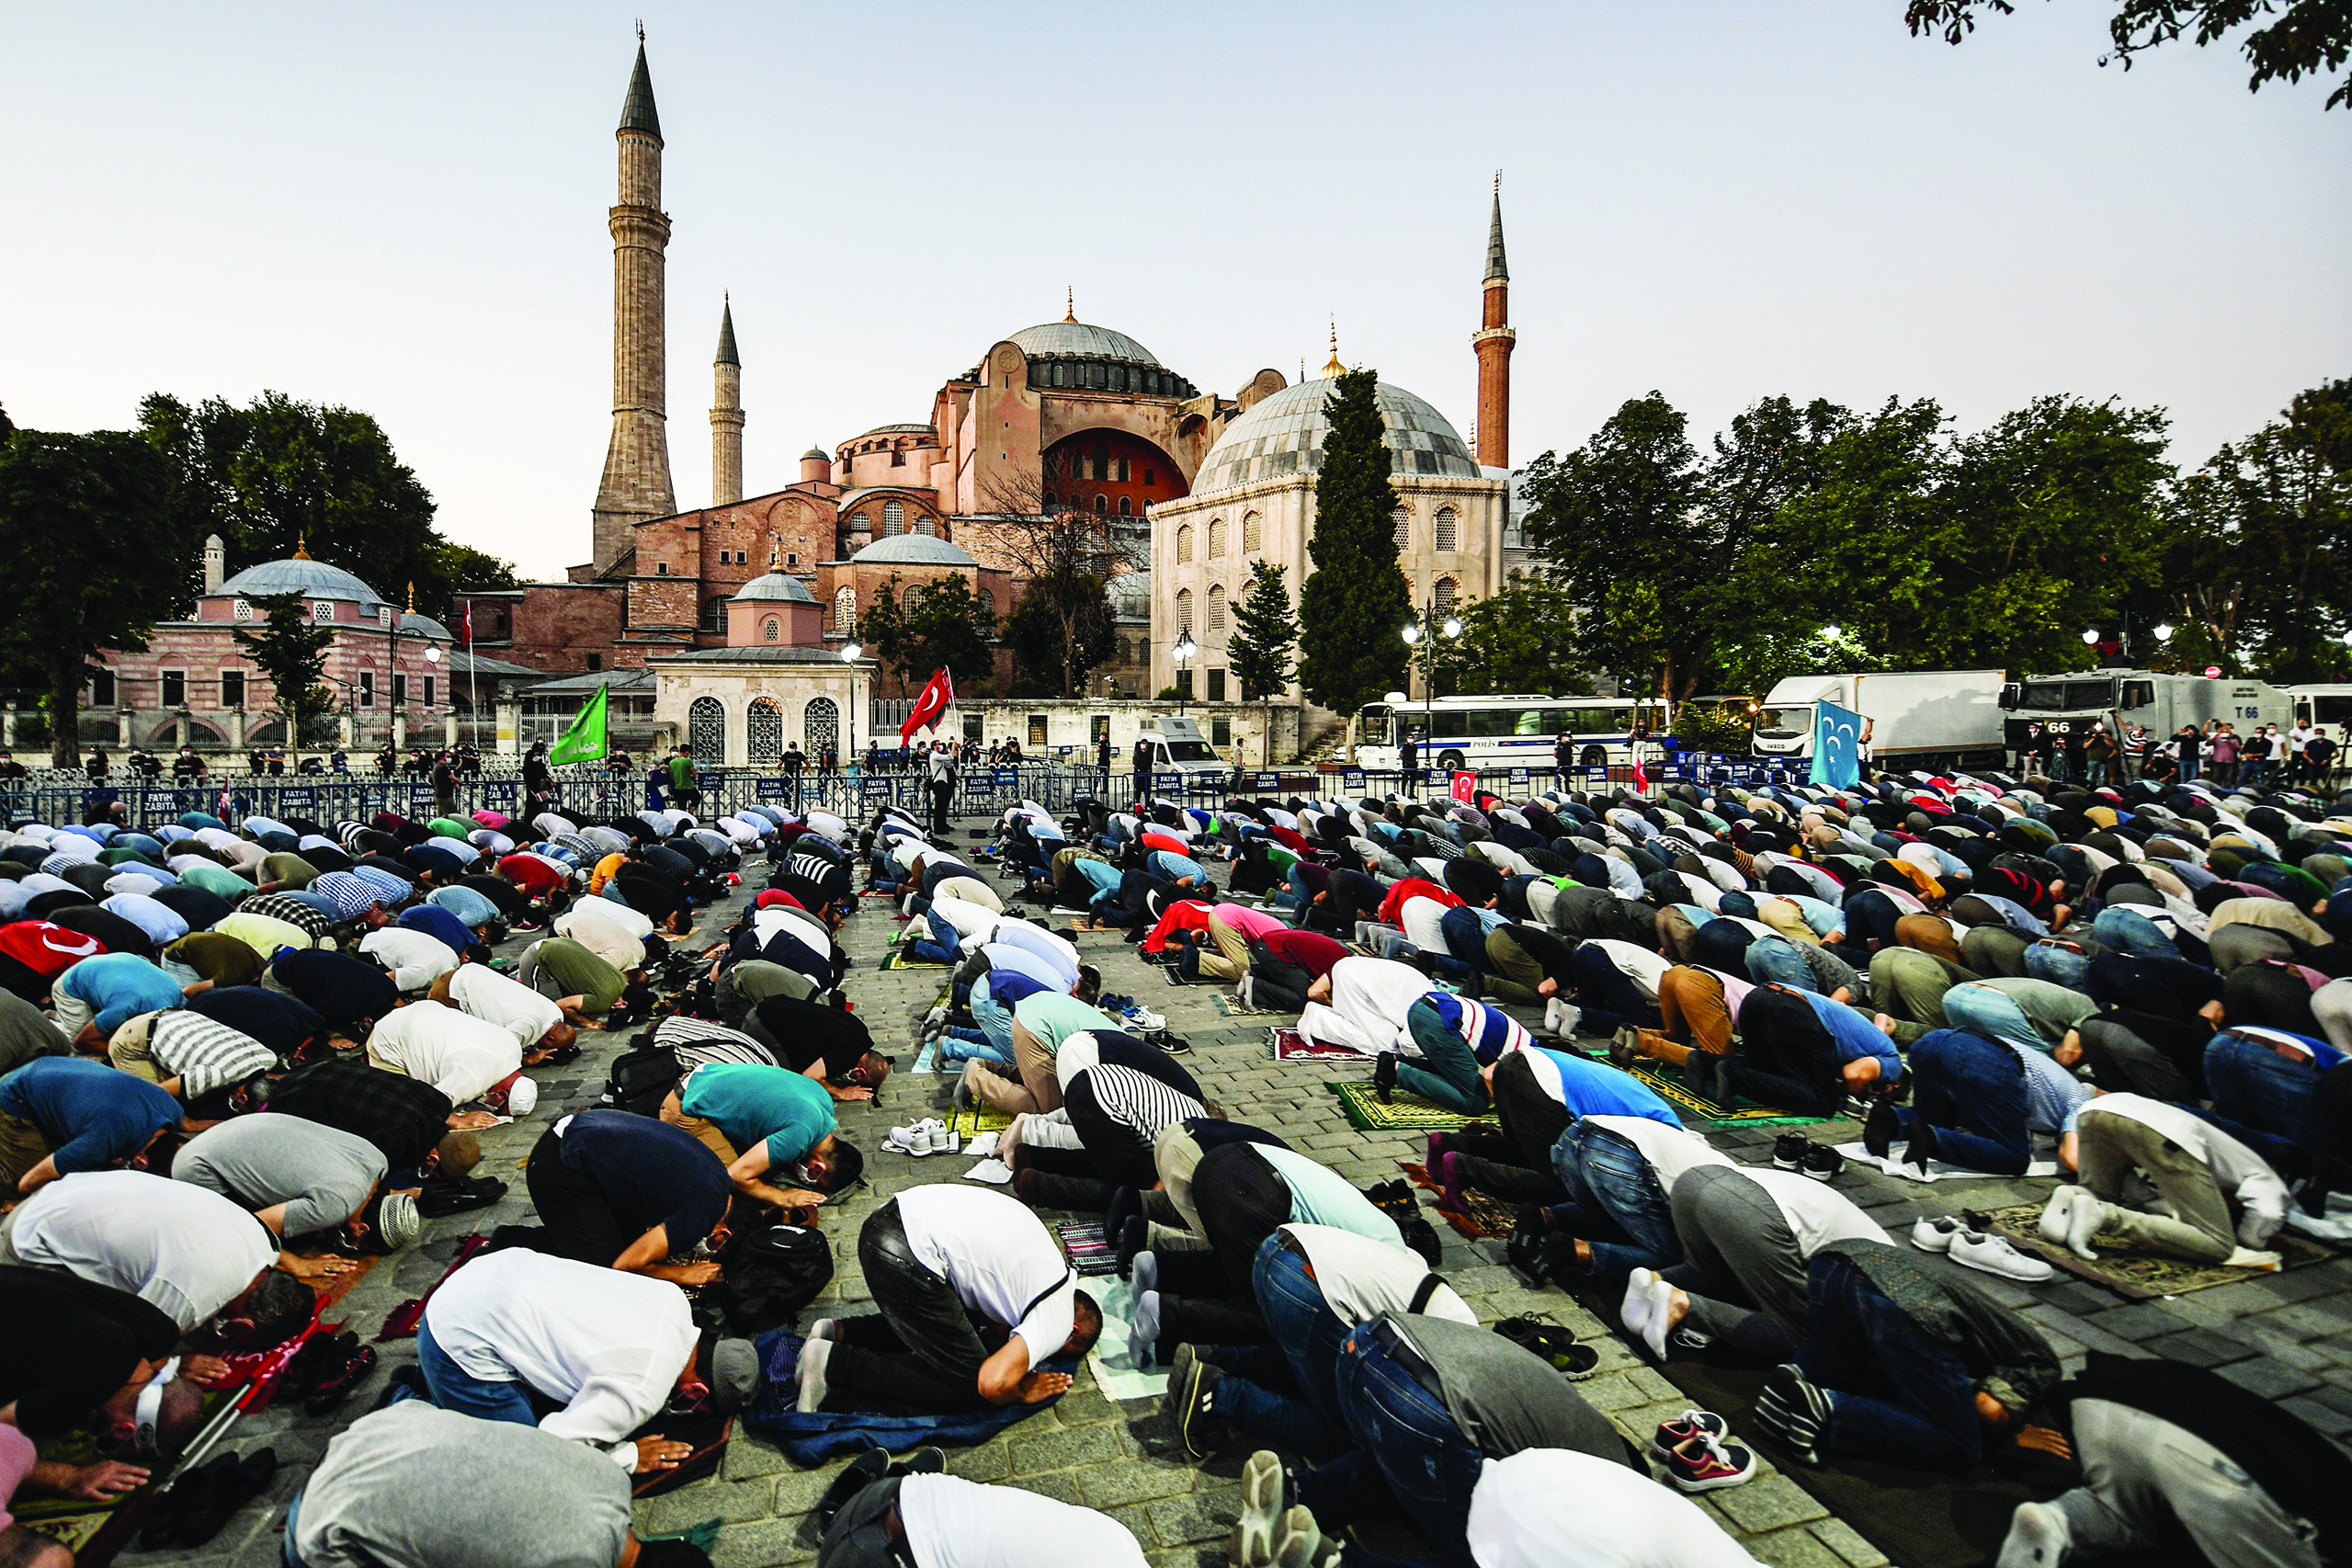 ISTANBUL: People pray outside the Hagia Sophia on Friday as they gather to celebrate after a top Turkish court revoked its status as a museum, clearing the way for it to be turned back into a mosque. — AFP